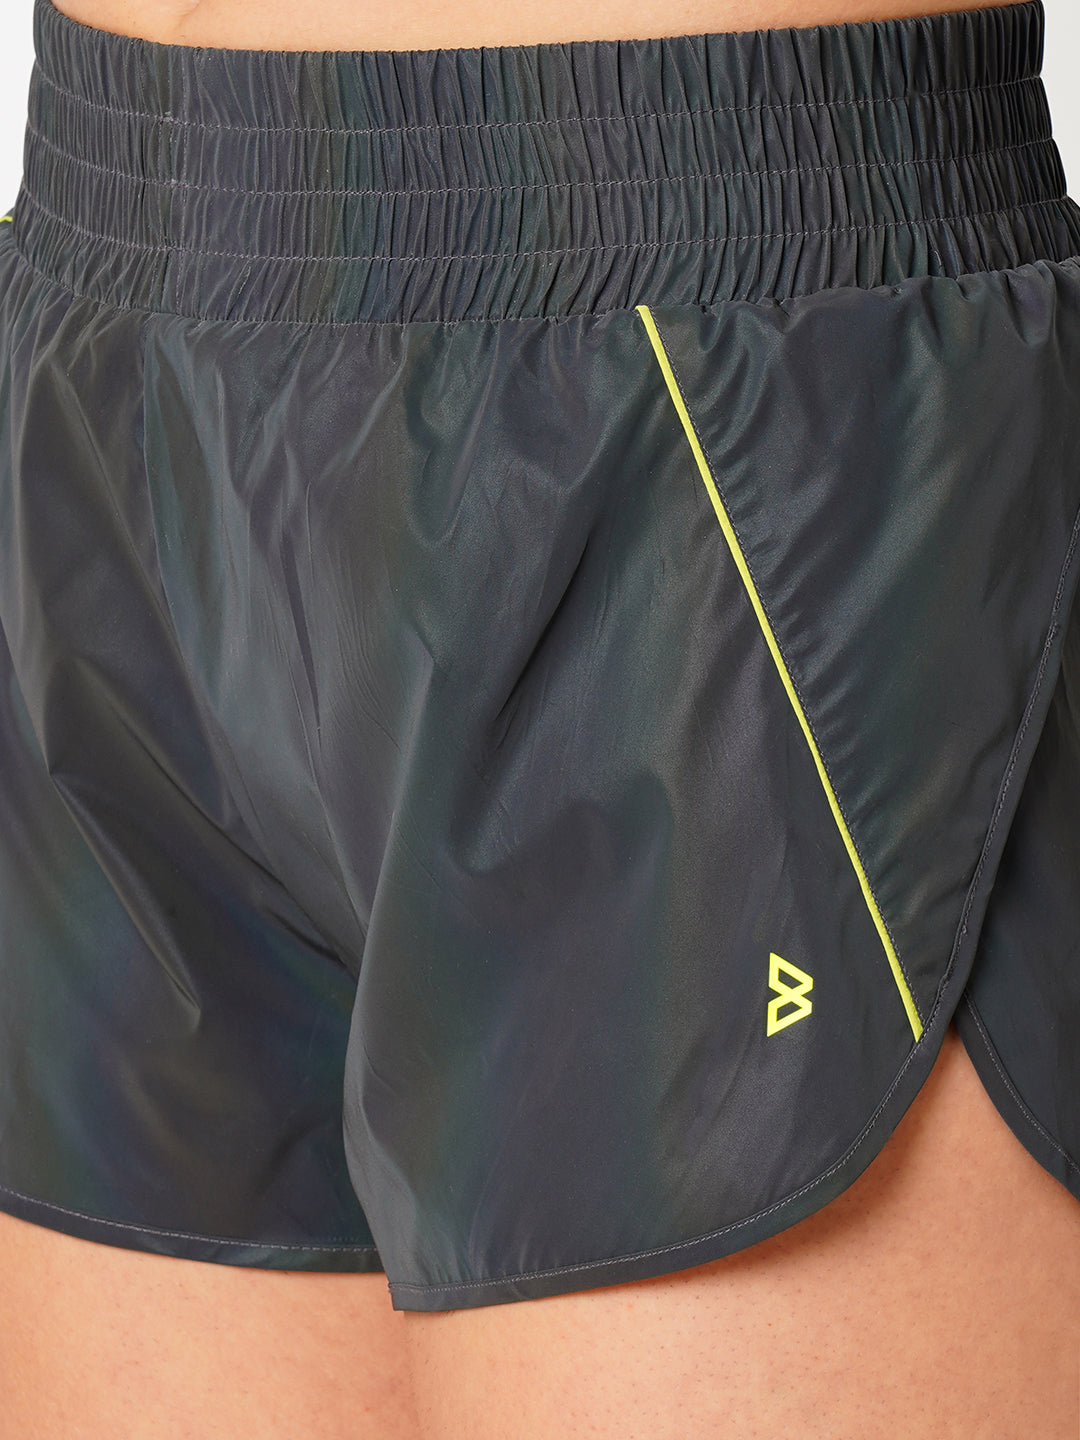 Greatest Obsession Reflective Shorts BODD ACTIVE